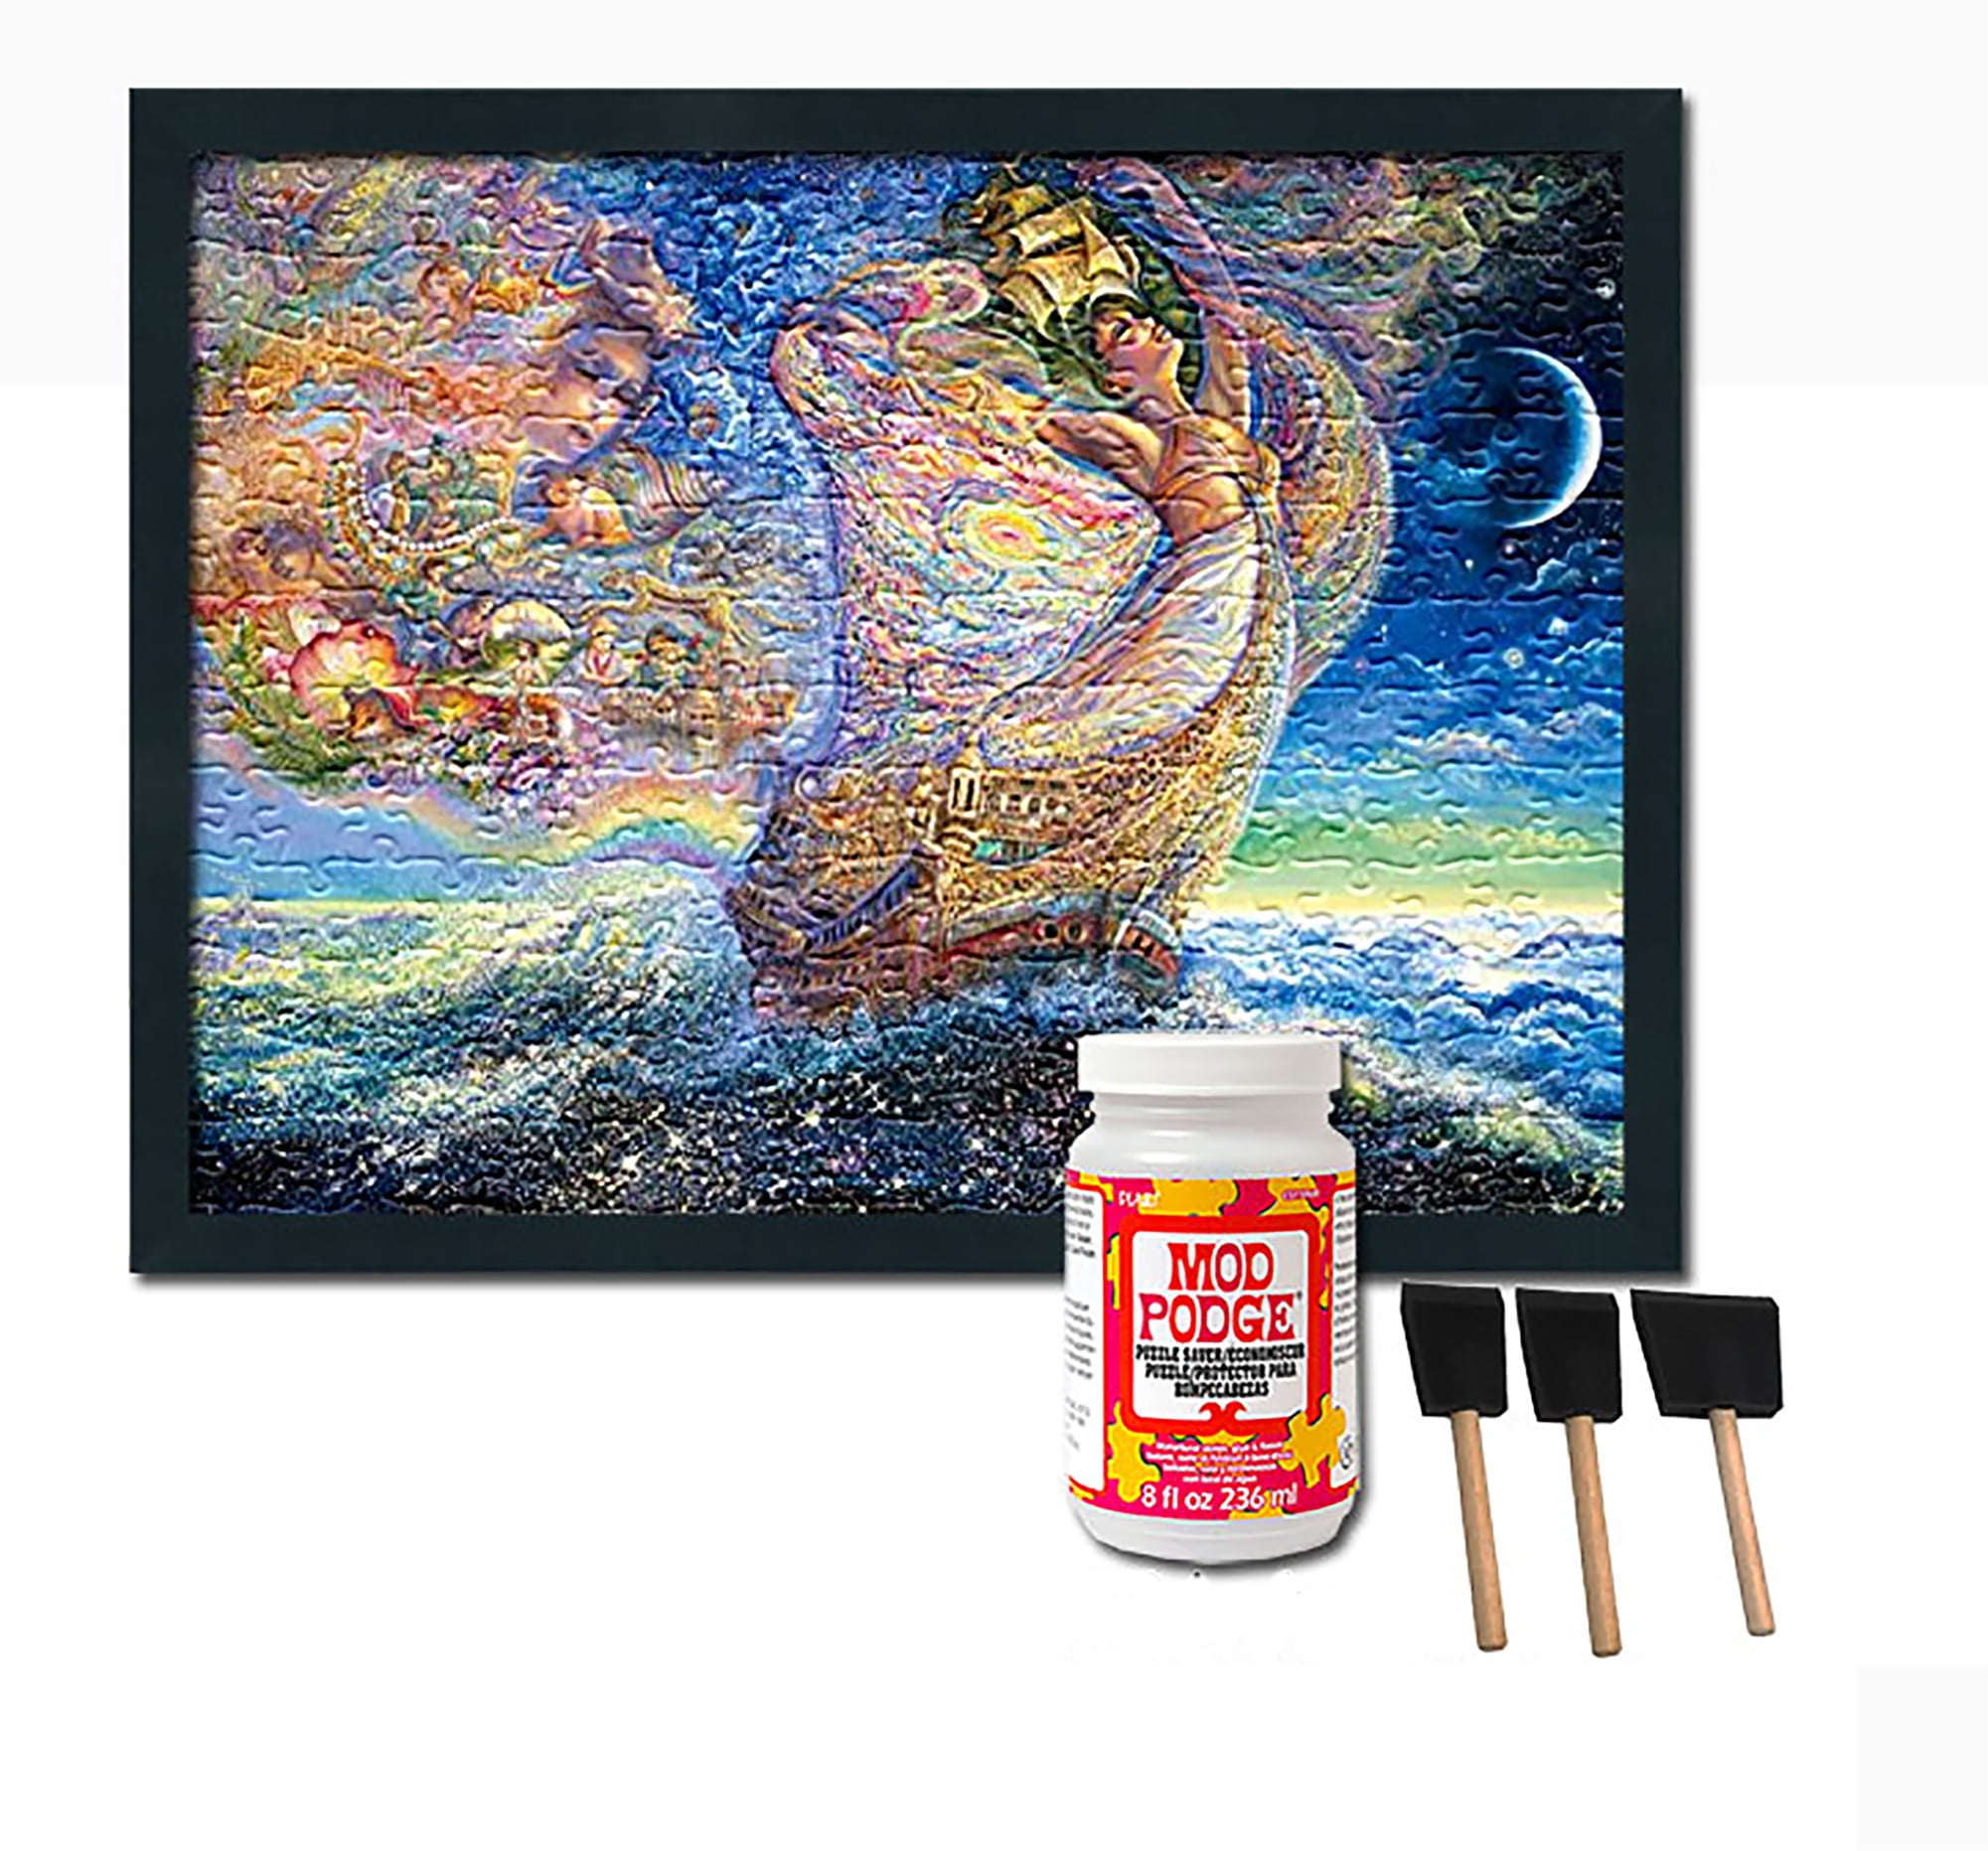 Mod Podge Jigsaw Puzzle Frame Kit - For Puzzles Measuring 24x30 inches 